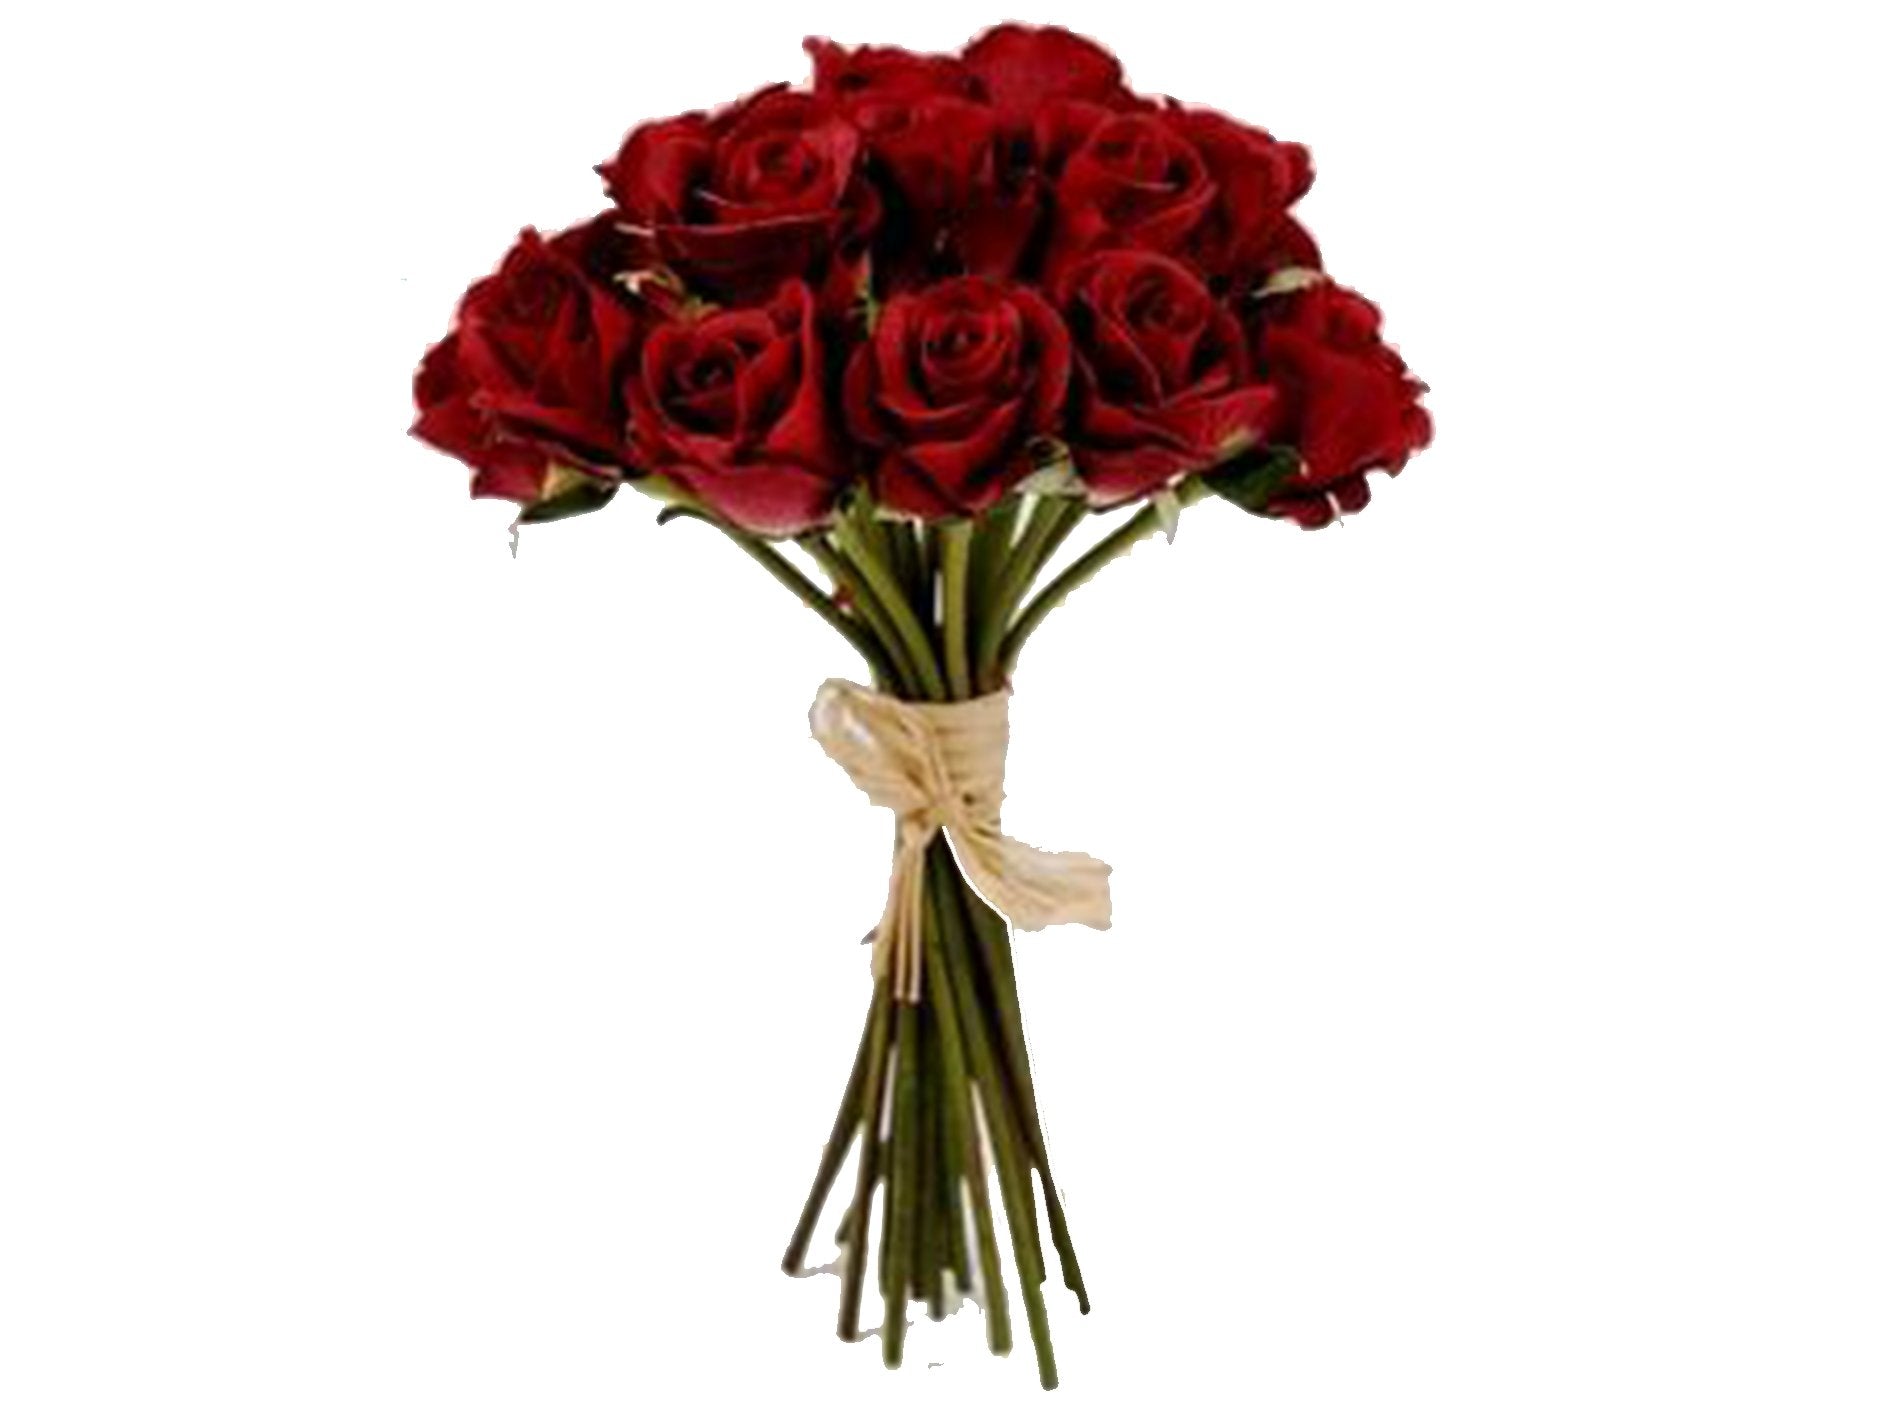 Silk Roses Red (Ideal For Mothers Day) - VIR Wholesale